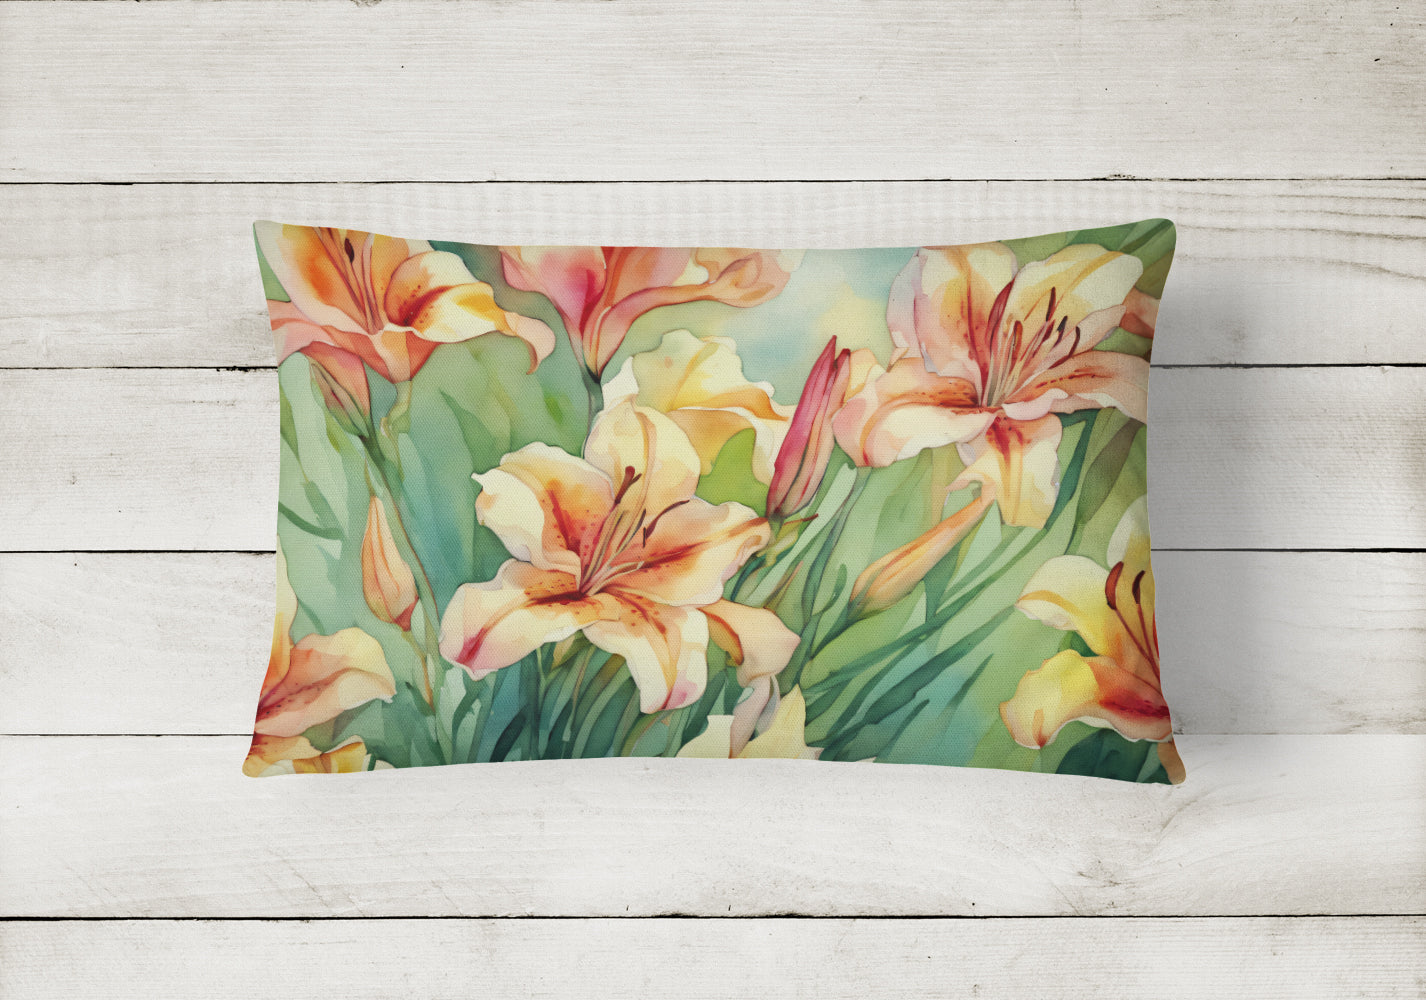 Buy this Utah Sego Lilies in Watercolor Fabric Decorative Pillow